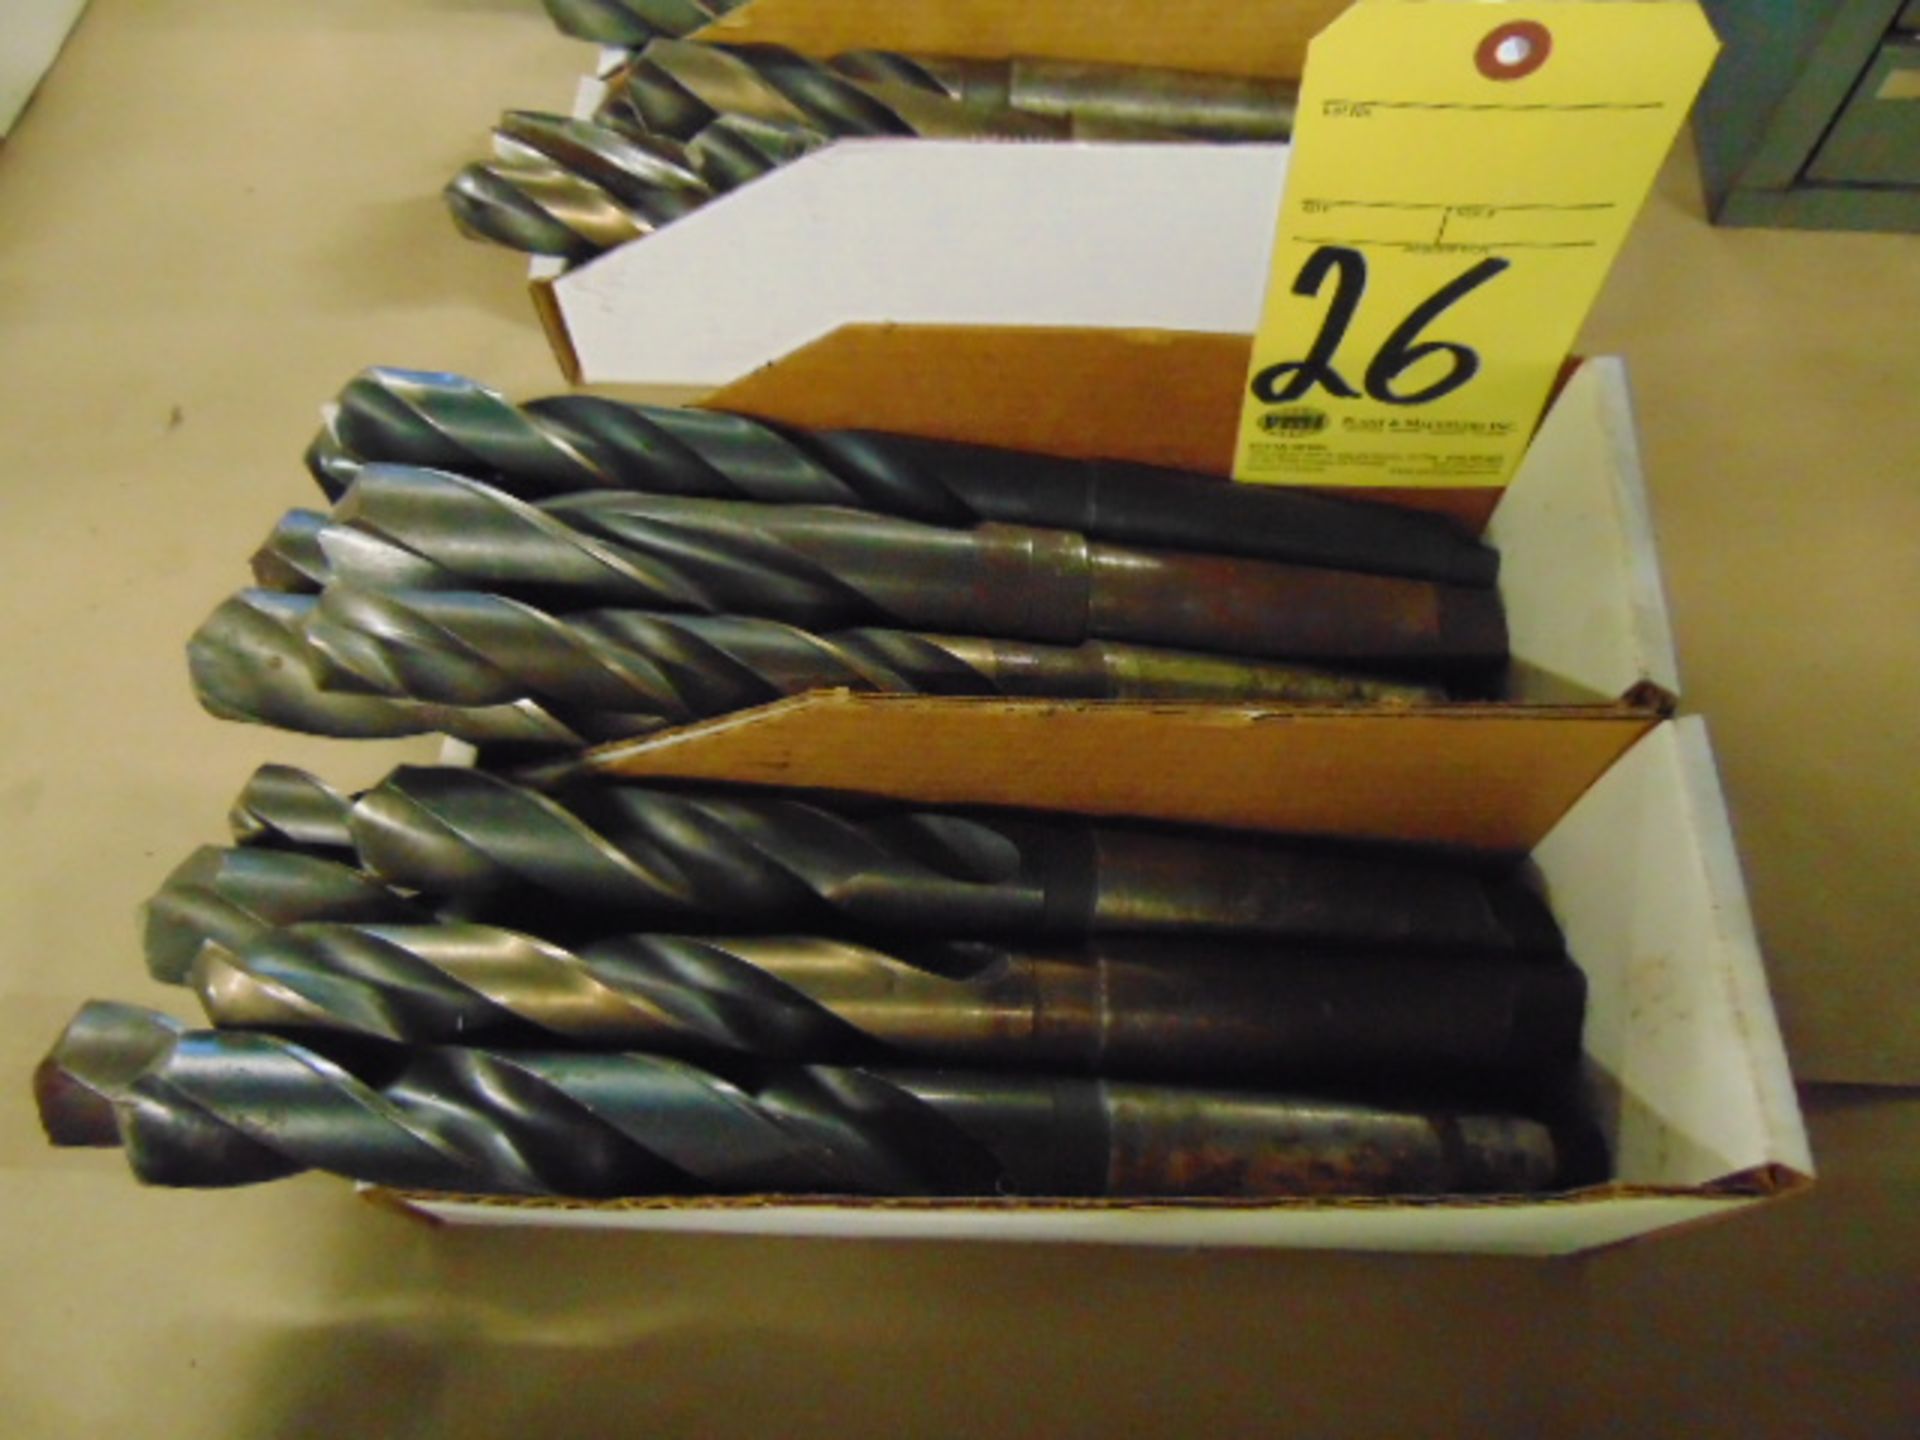 LOT OF TAPER SHANK DRILLS (in two boxes)